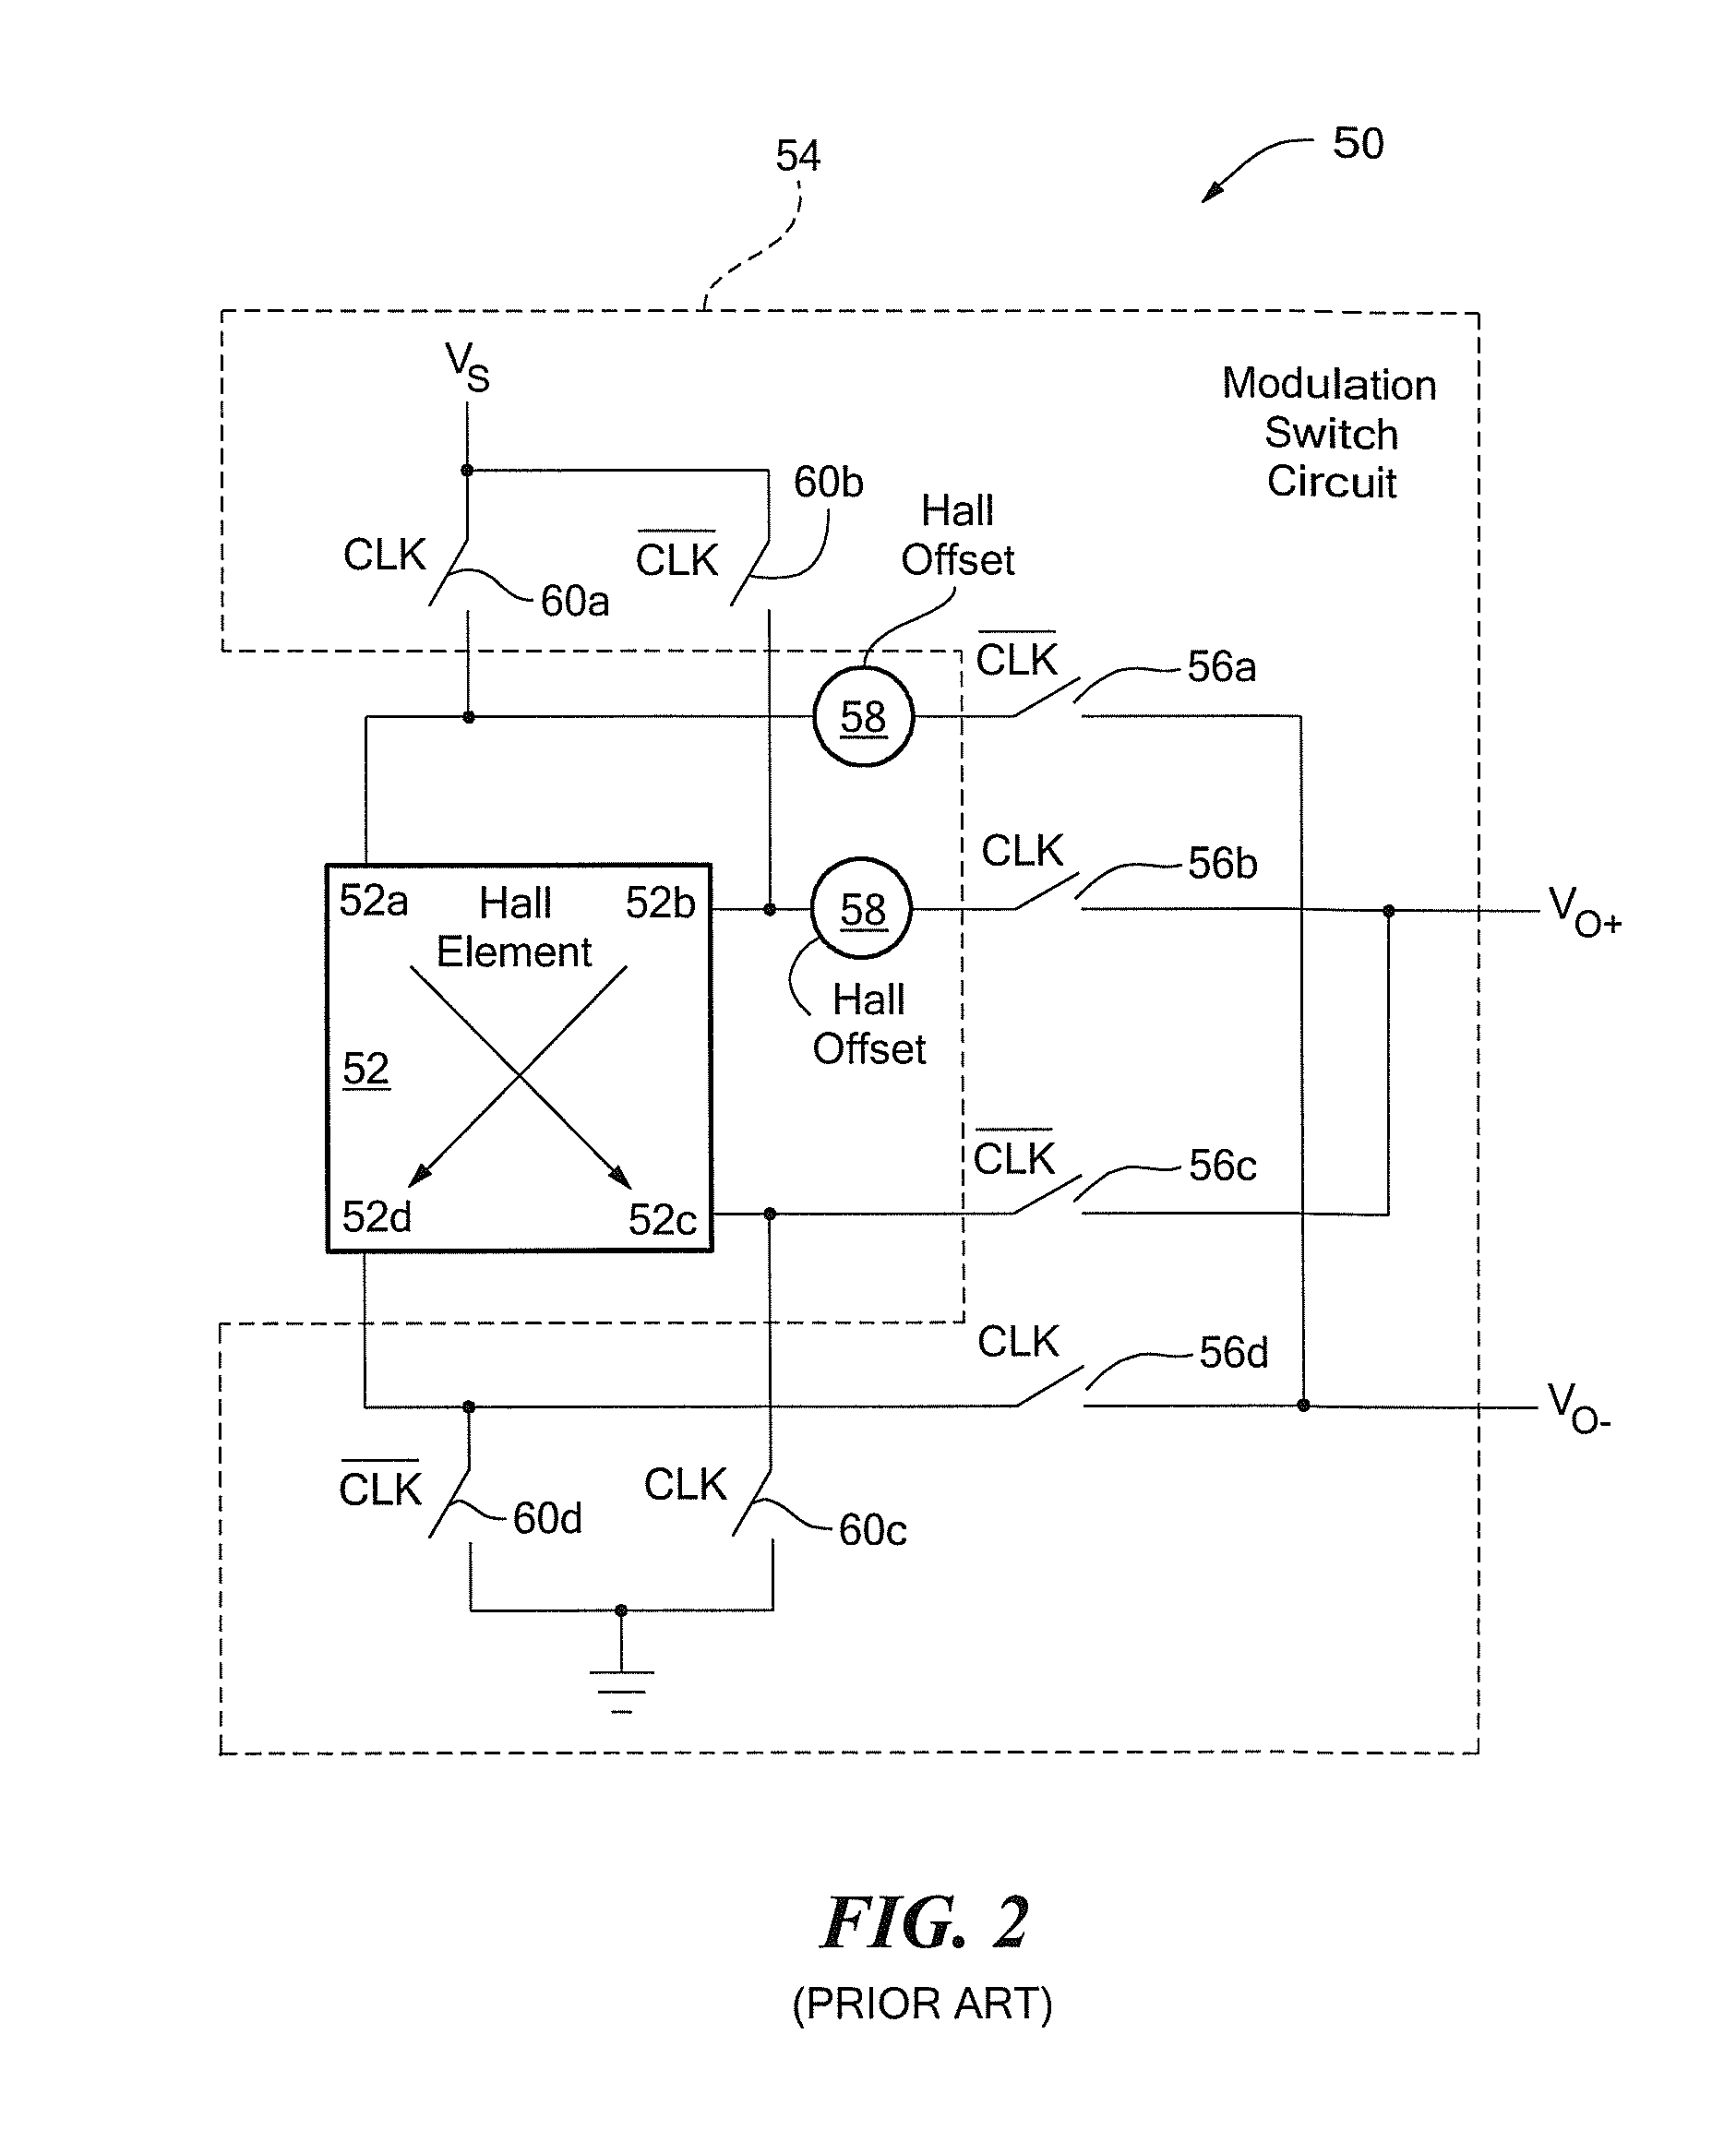 Circuits and methods using adjustable feedback for self-calibrating or self-testing a magnetic field sensor with an adjustable time constant